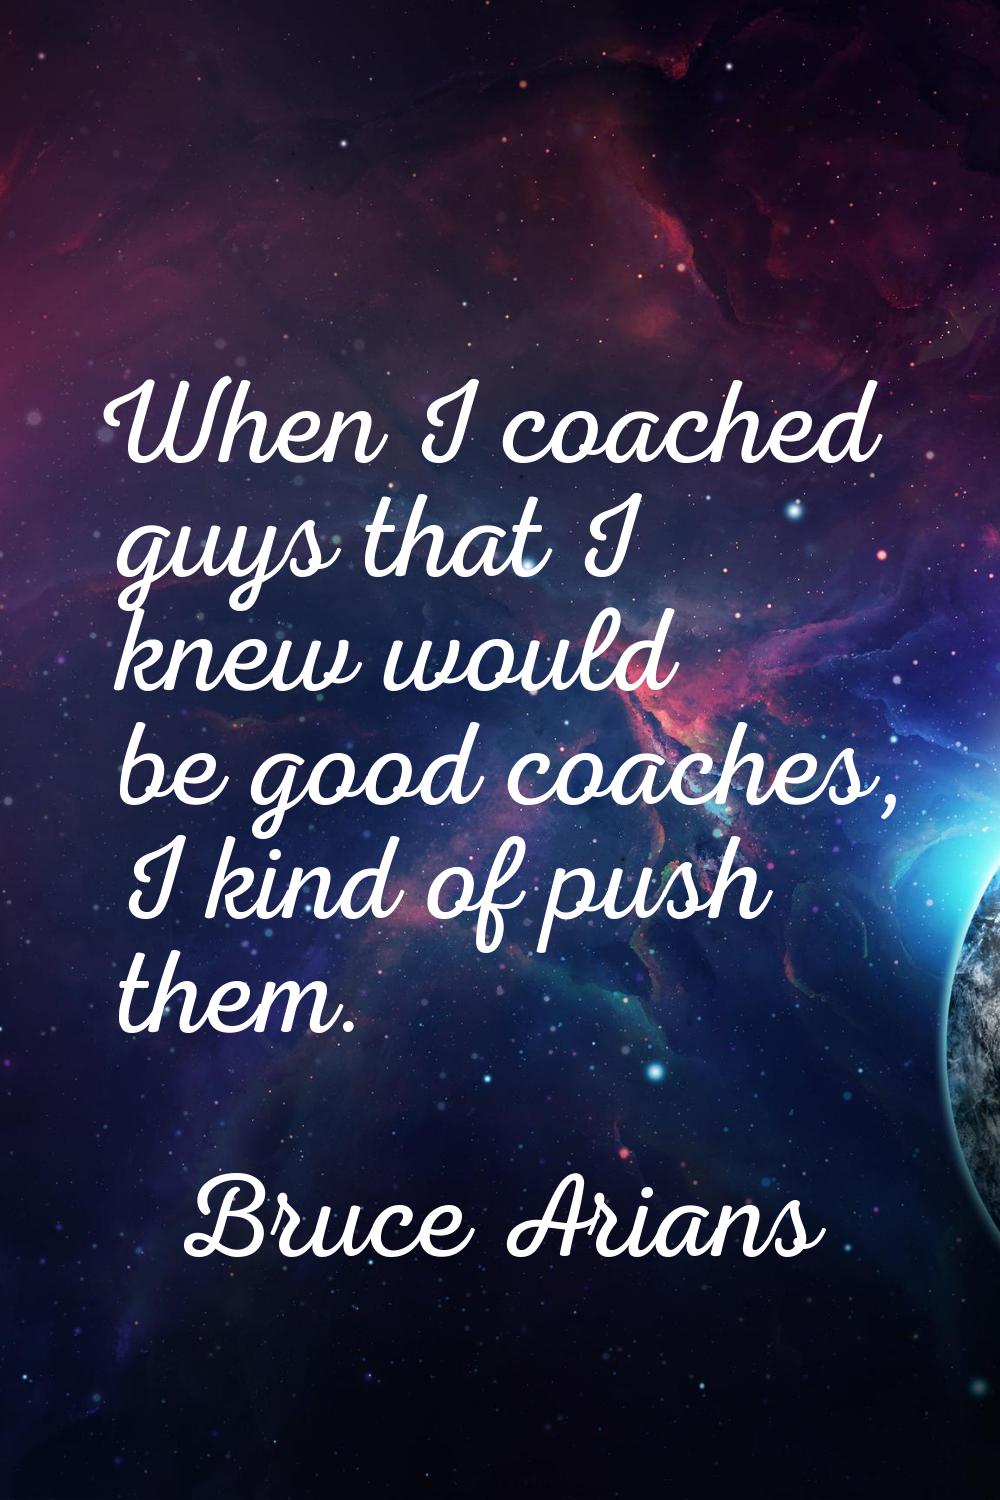 When I coached guys that I knew would be good coaches, I kind of push them.